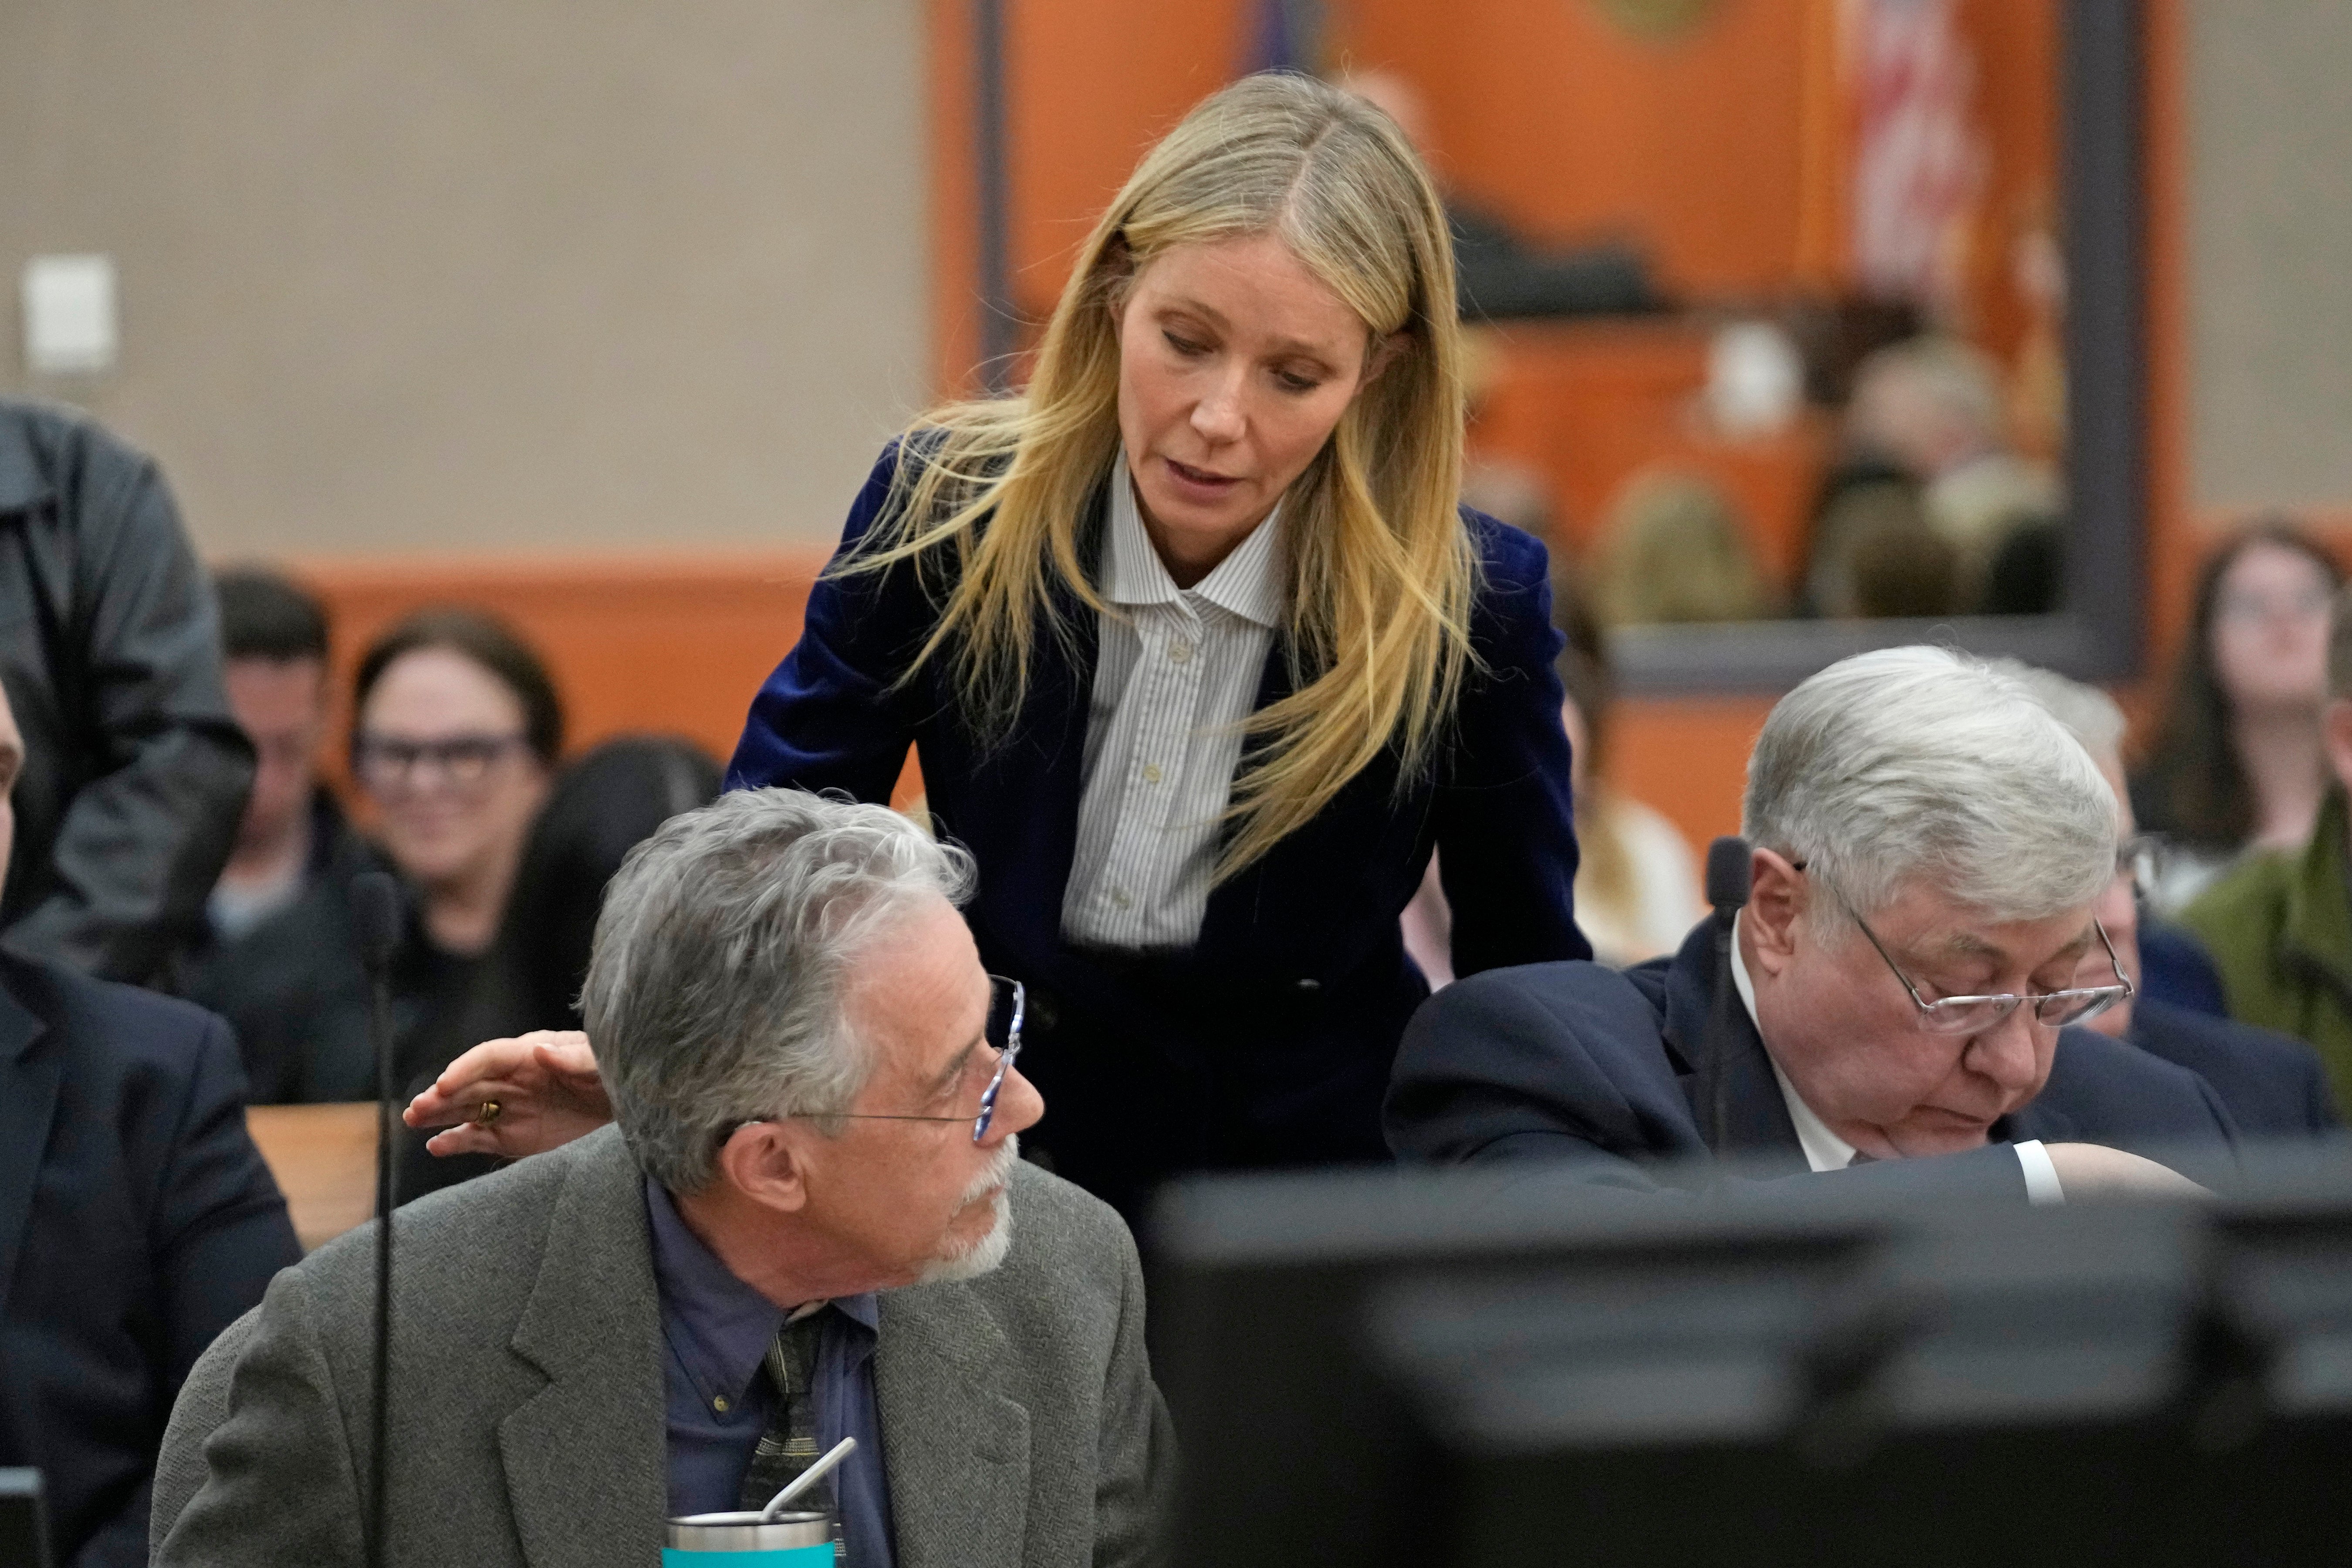 Gwyneth Paltrow speaks with retired optometrist Terry Sanderson, left, as she walks out of the courtroom following the reading of the verdict in their lawsuit trial, Thursday, March 30, 2023, in Park City, Utah